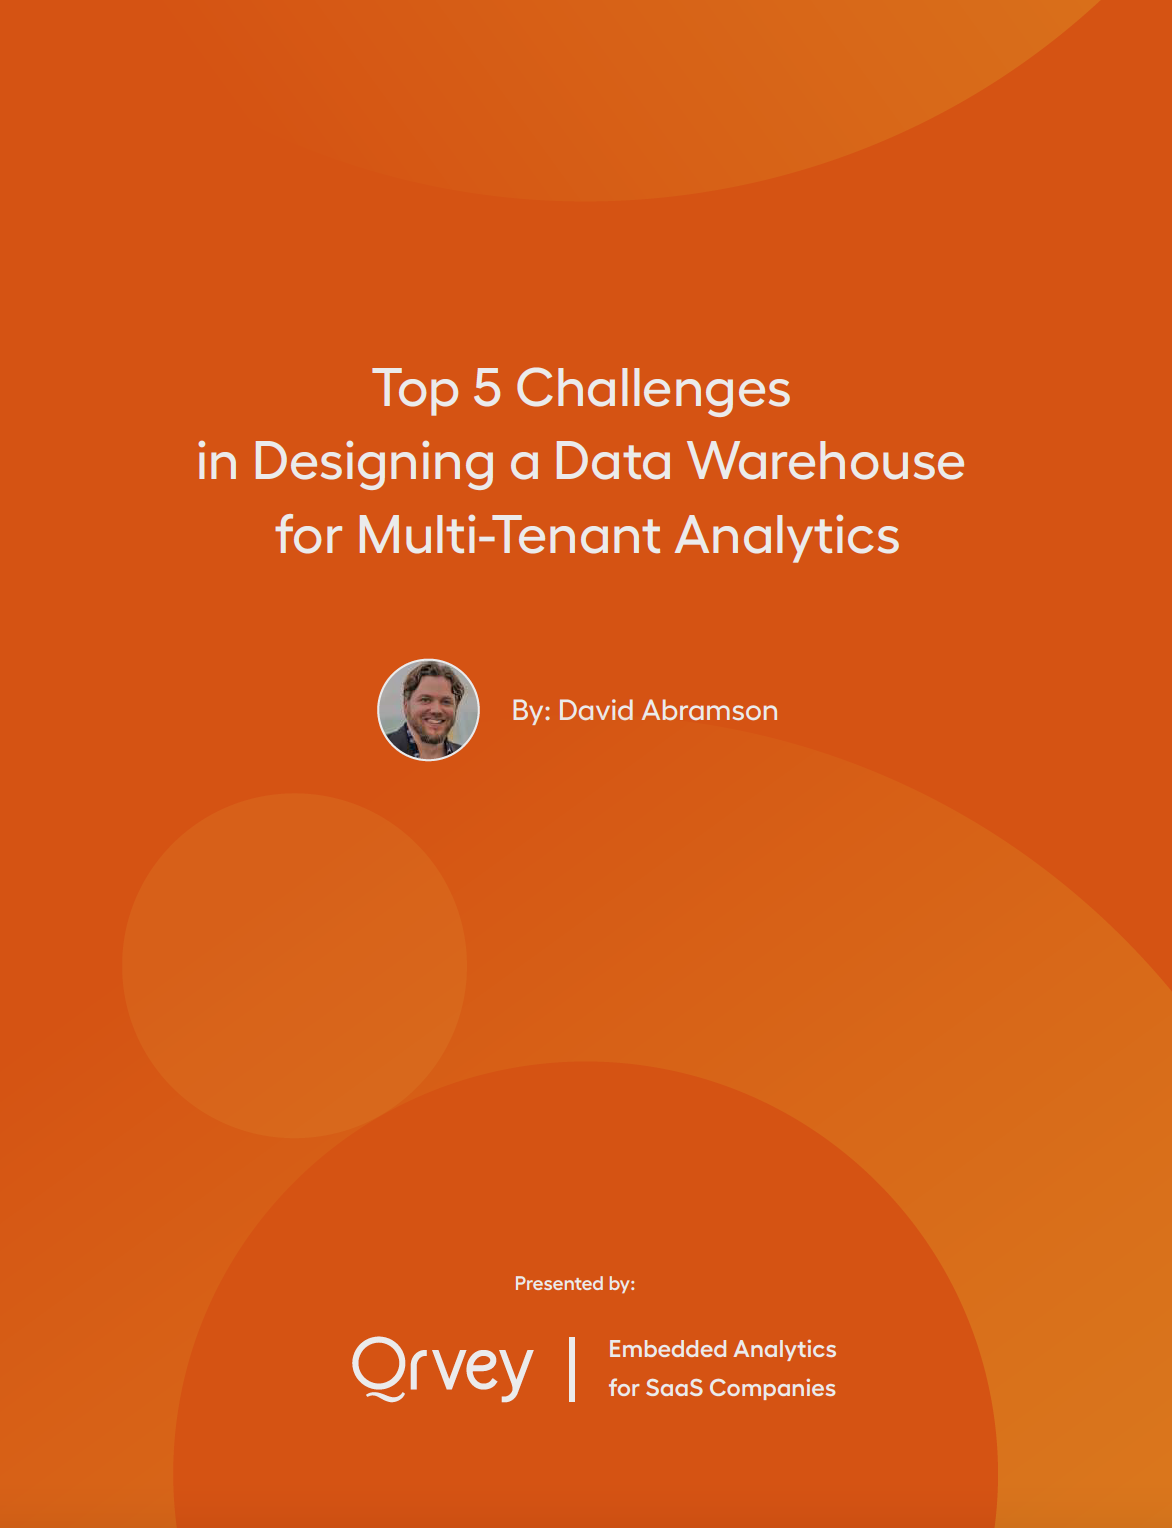 Read: Top 5 Challenges Designing Data Warehouse for Multi-tenant Analytics